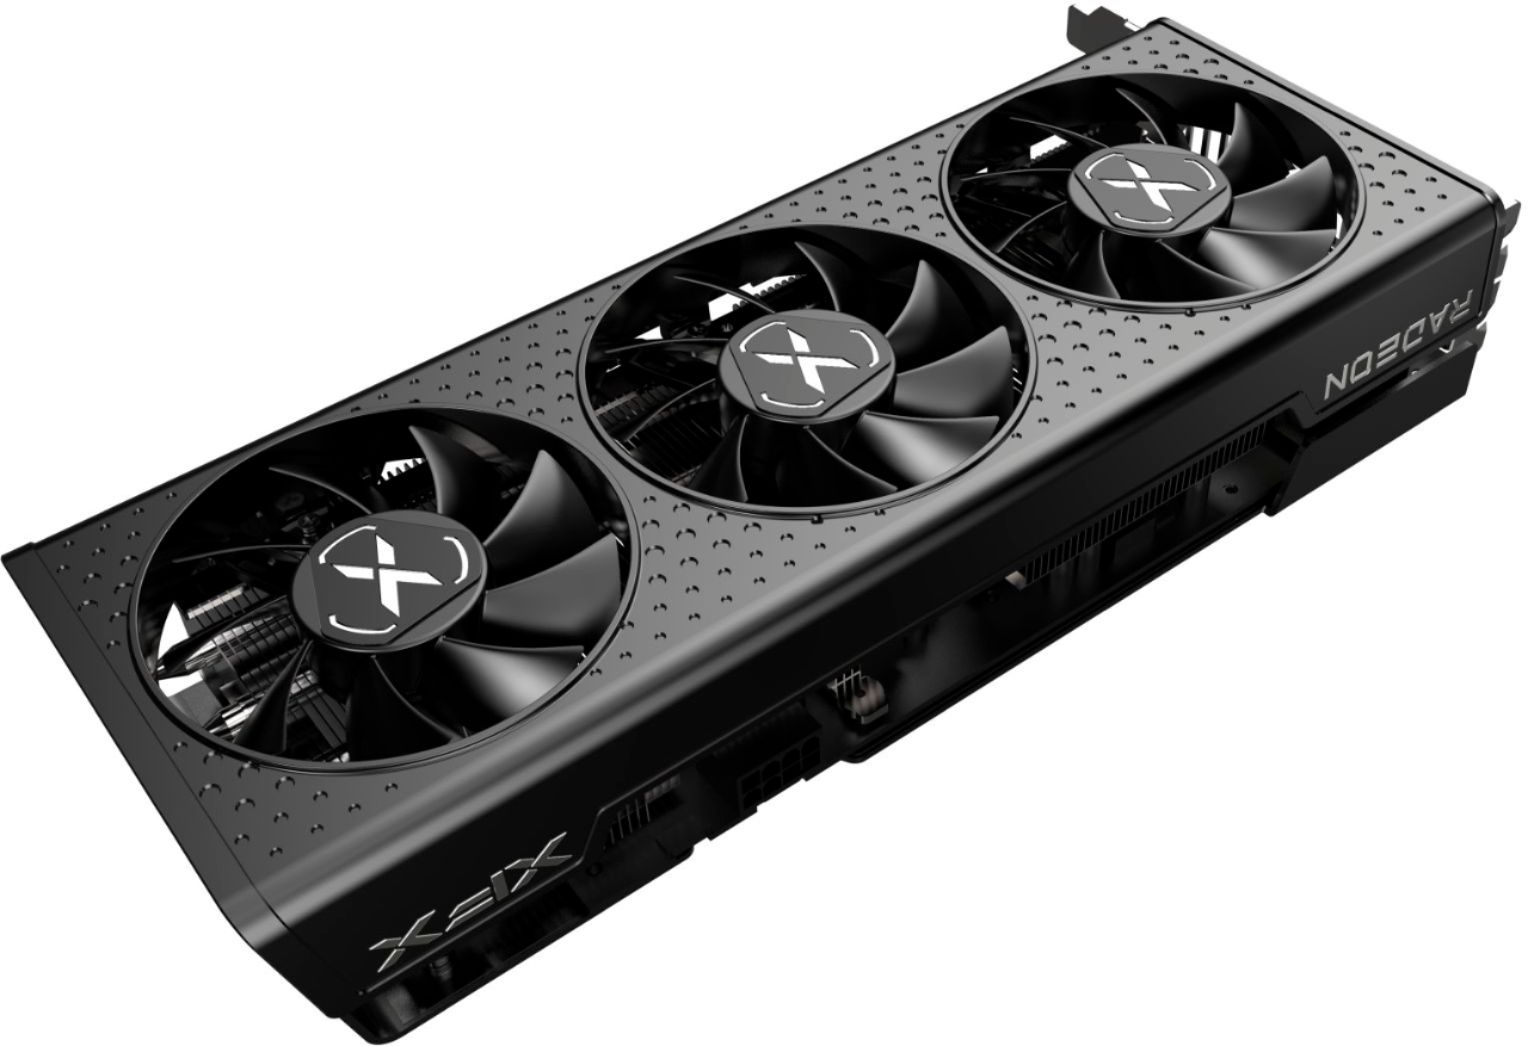 AMD Radeon RX 6600 XT Graphics Cards Launched For $379 (Approx